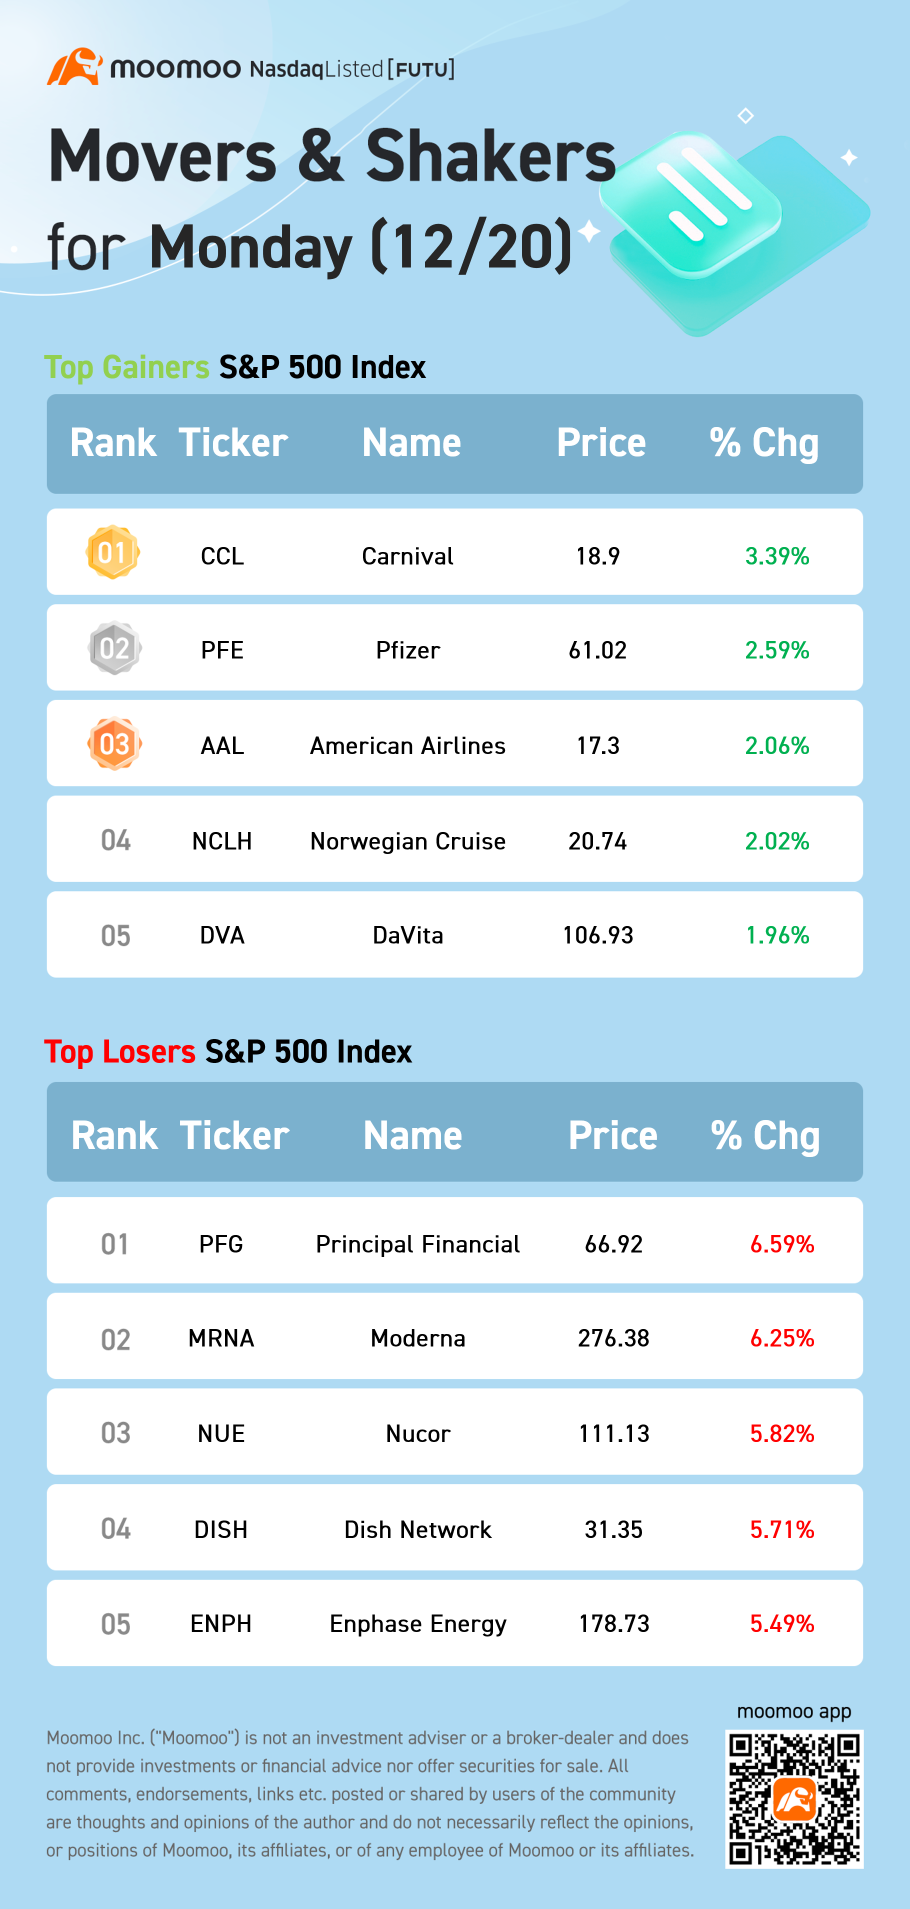 S&P 500 Movers for Monday (12/20)